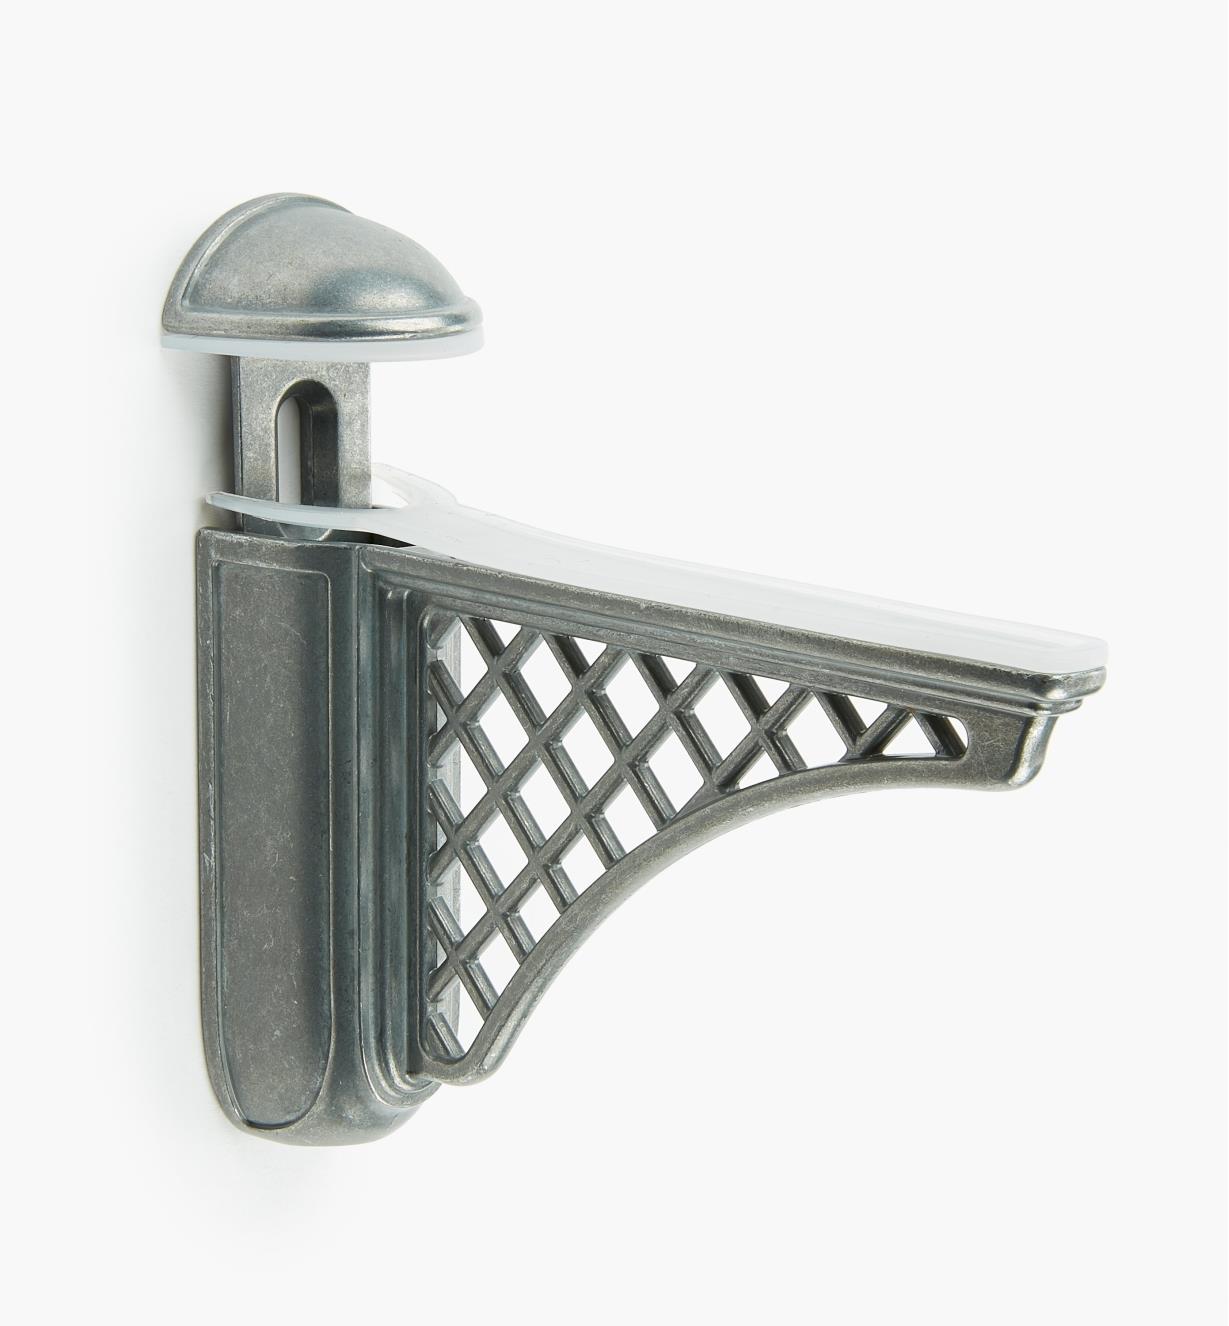 01A1851 - Colonial Tumbled Nickel Adjustable Bracket, each